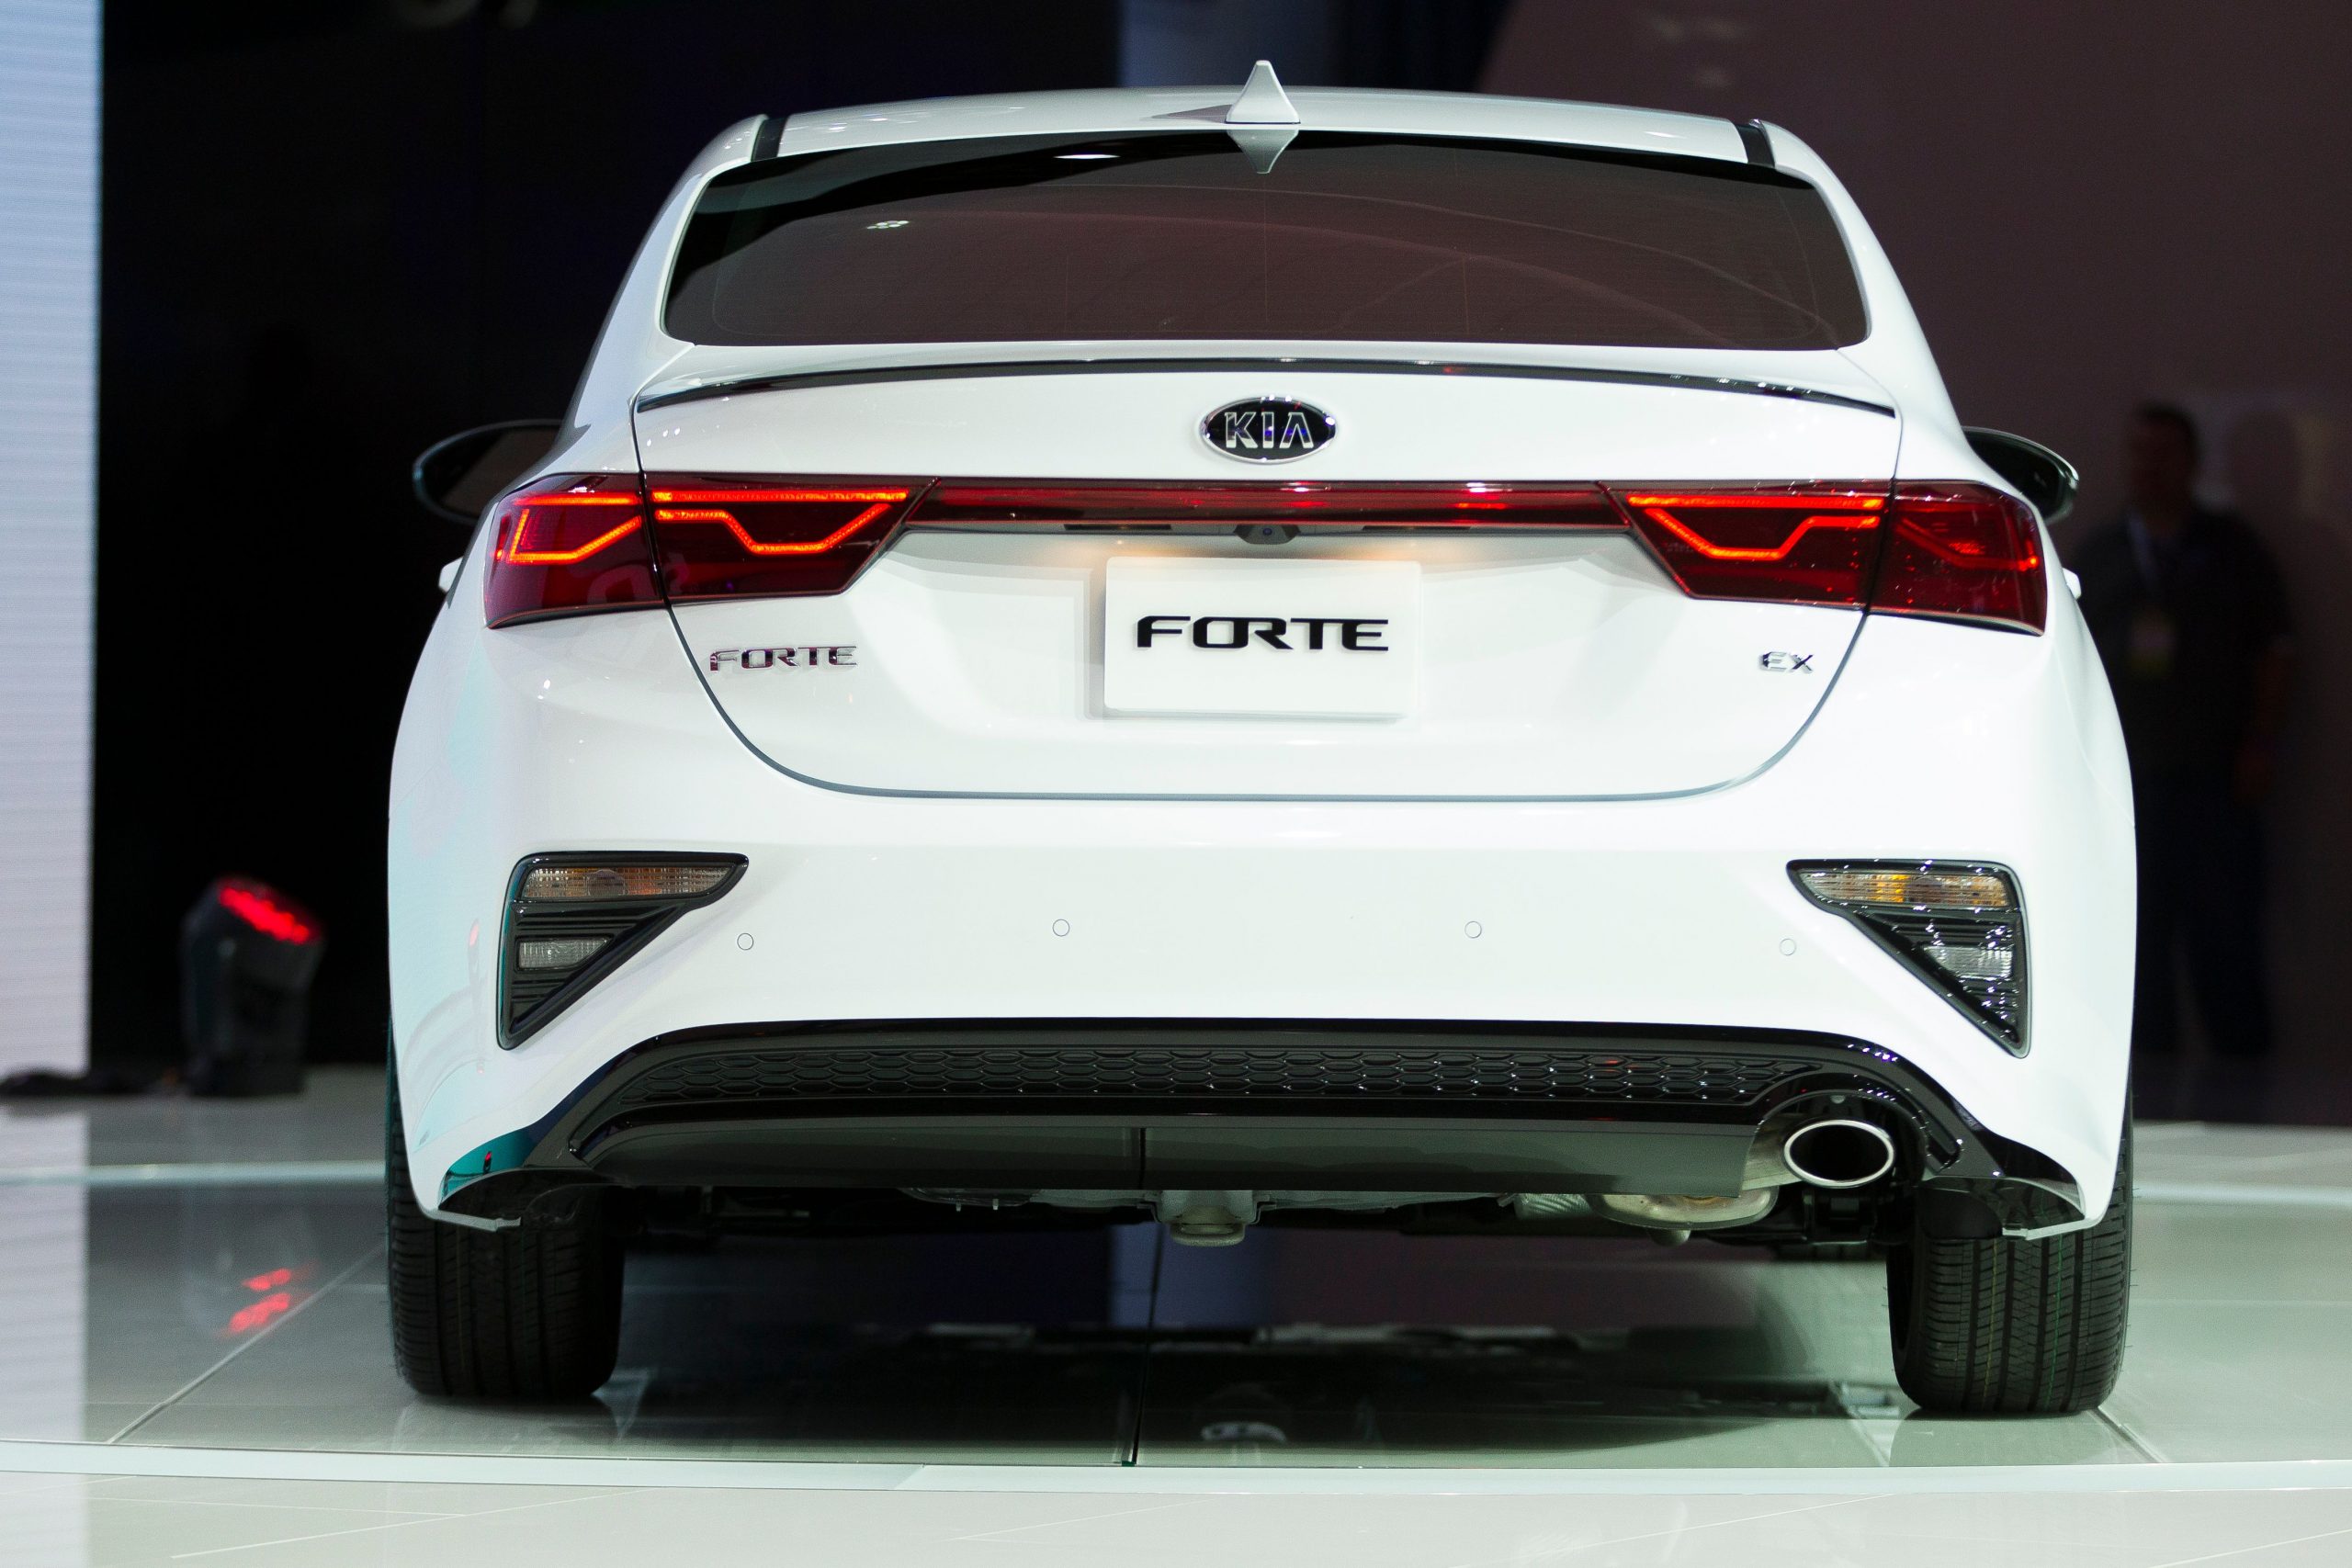 Pics of the 2021 Kia Forte interior 10 things to love and hate   DriveAndReview